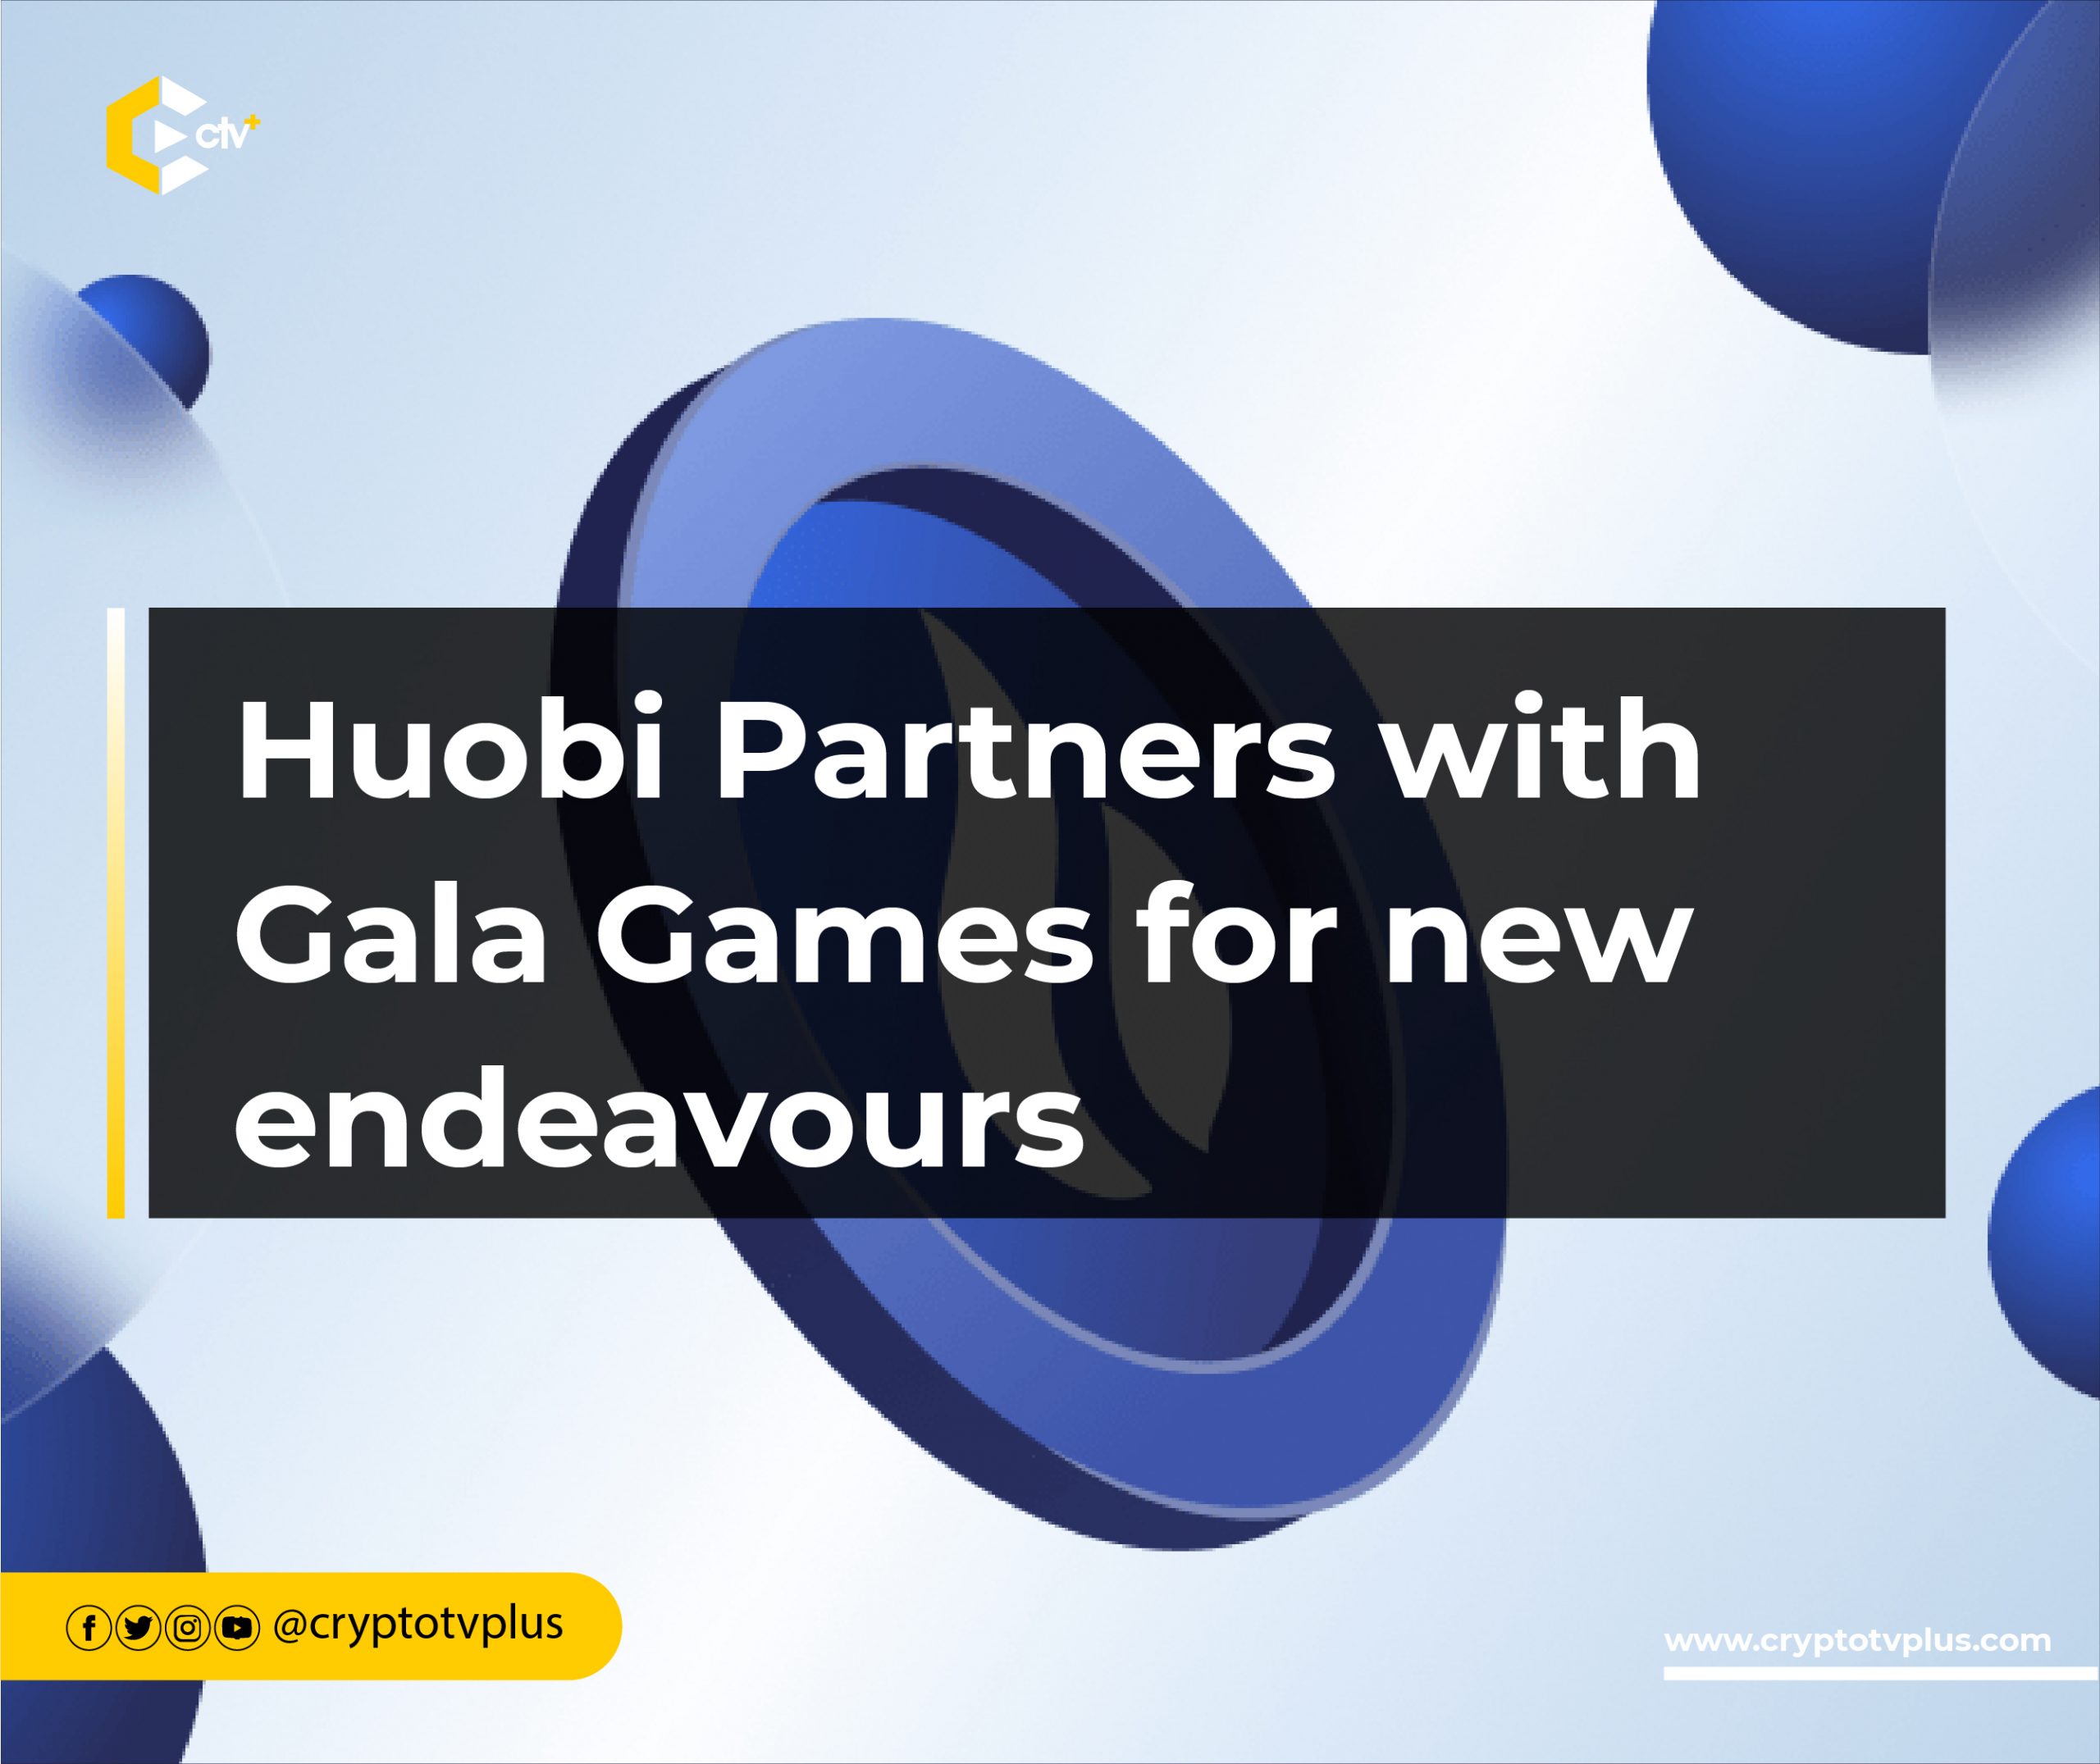 Huobi Partners with Gala Games for new endeavours